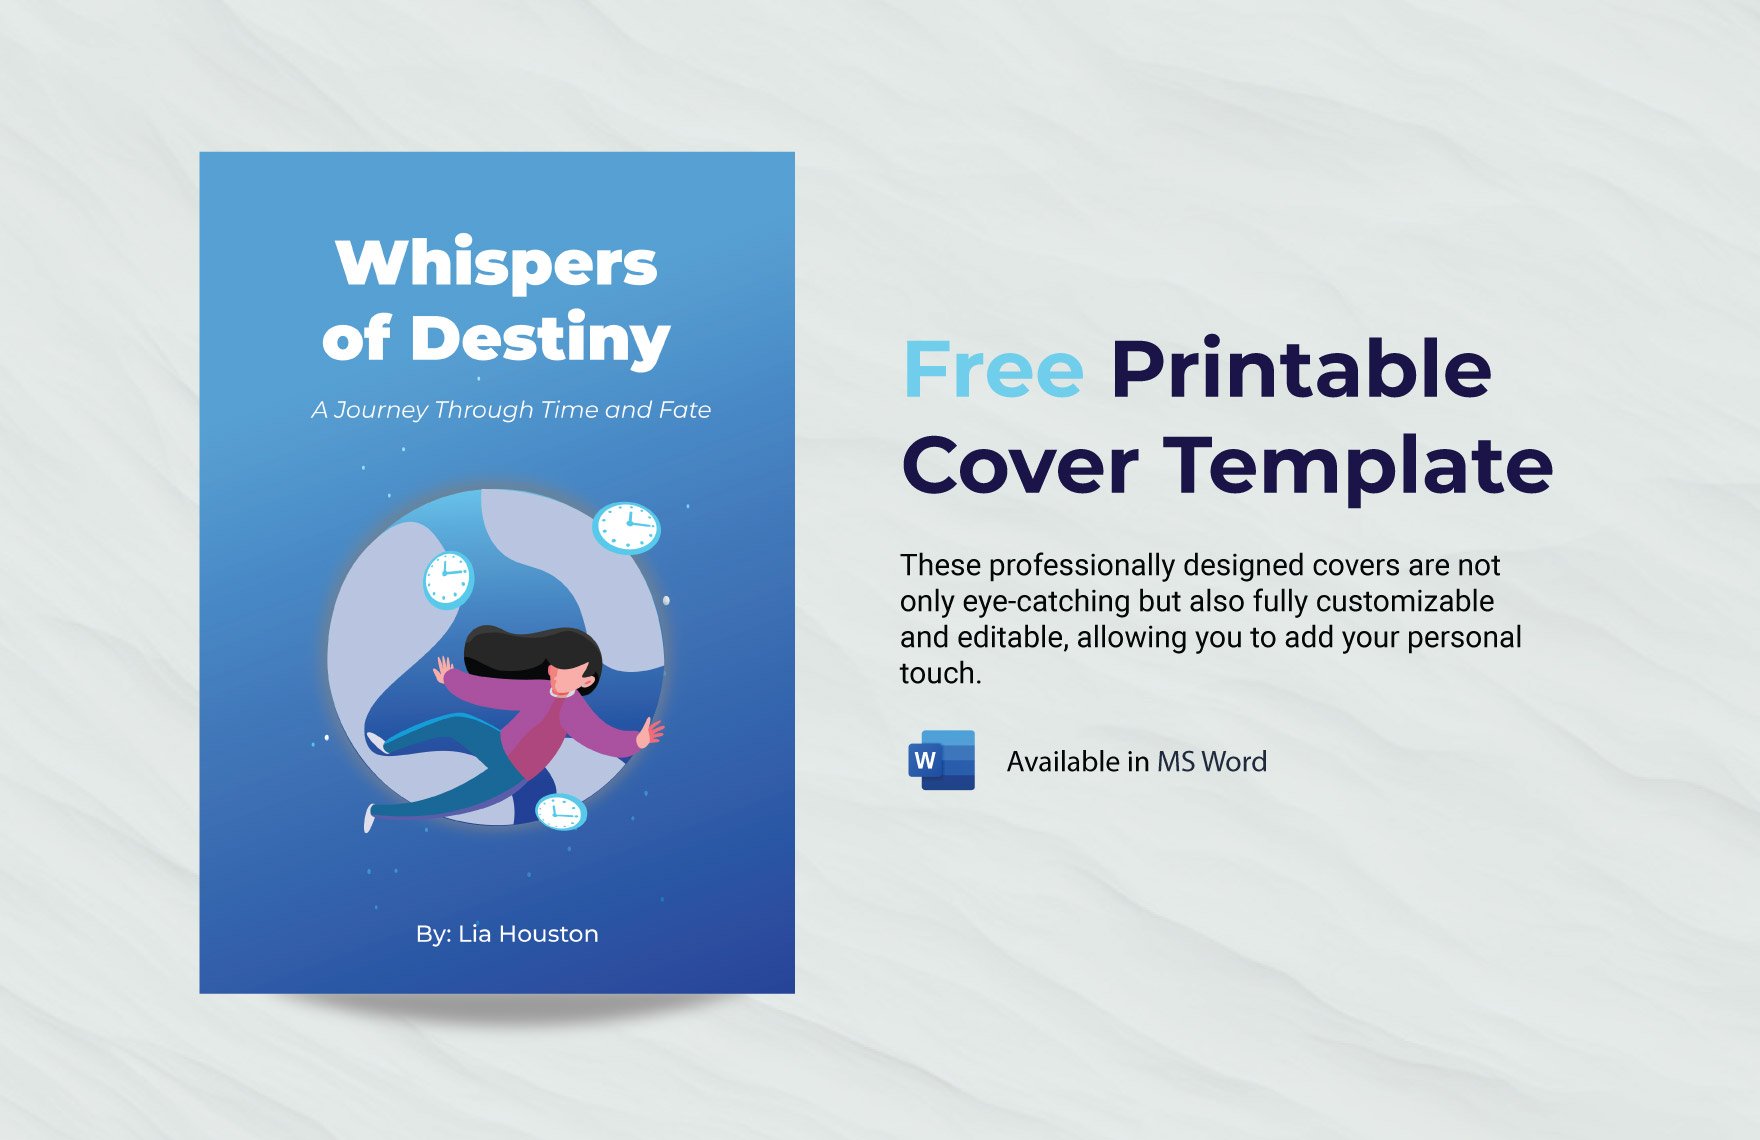 Free Printable Cover Template in Word